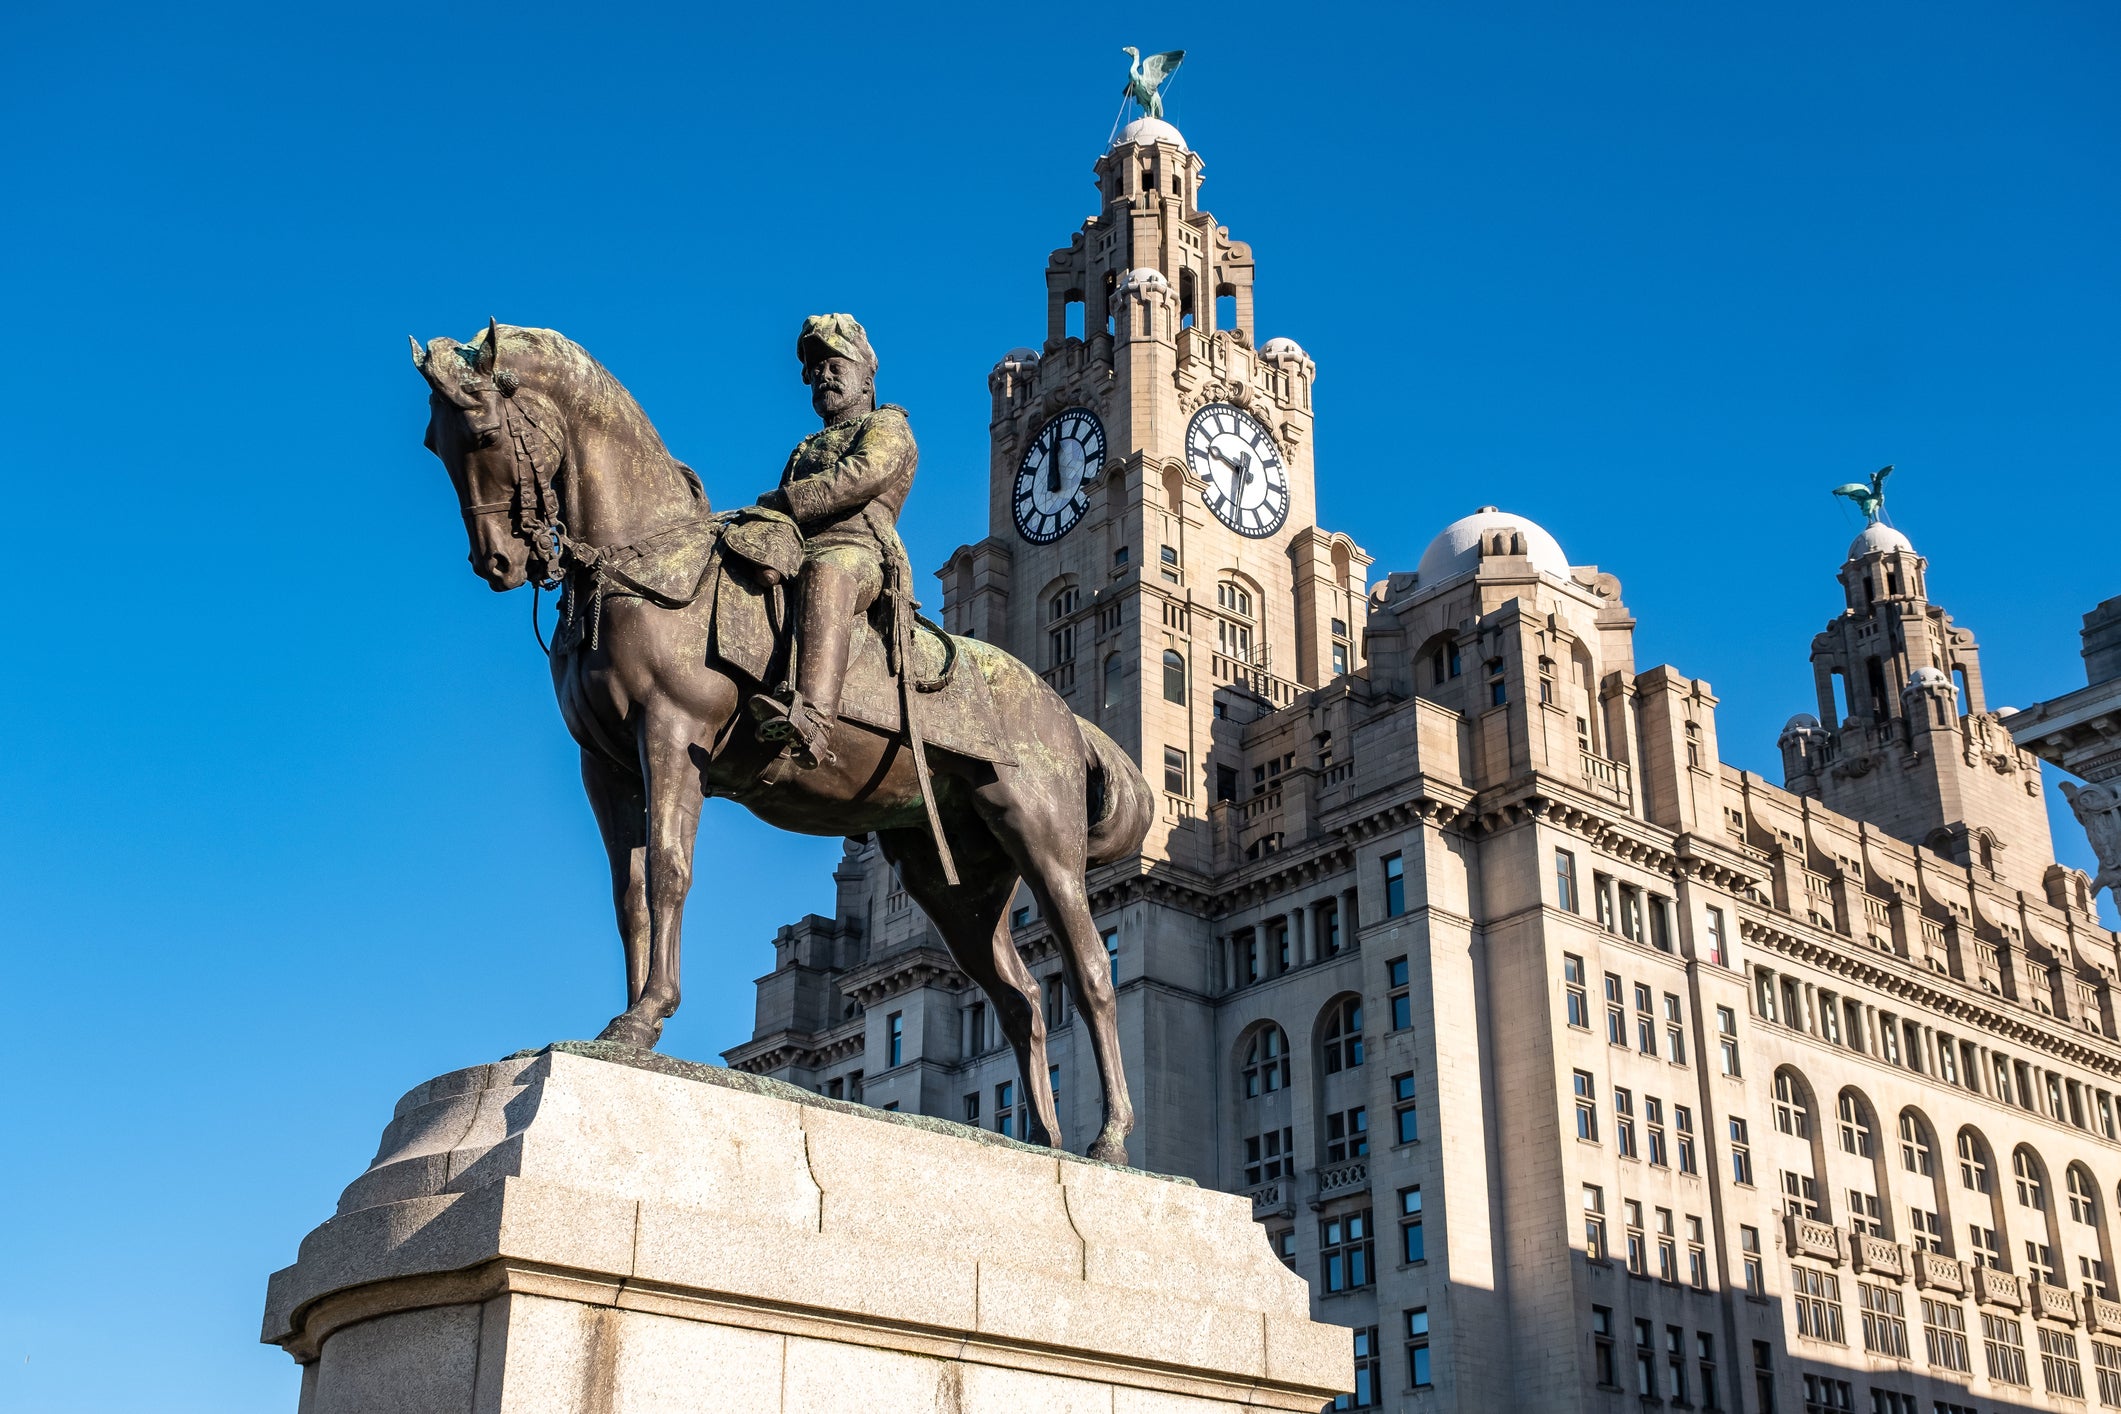 The Edward VII monument at the Pier Head, close to the river